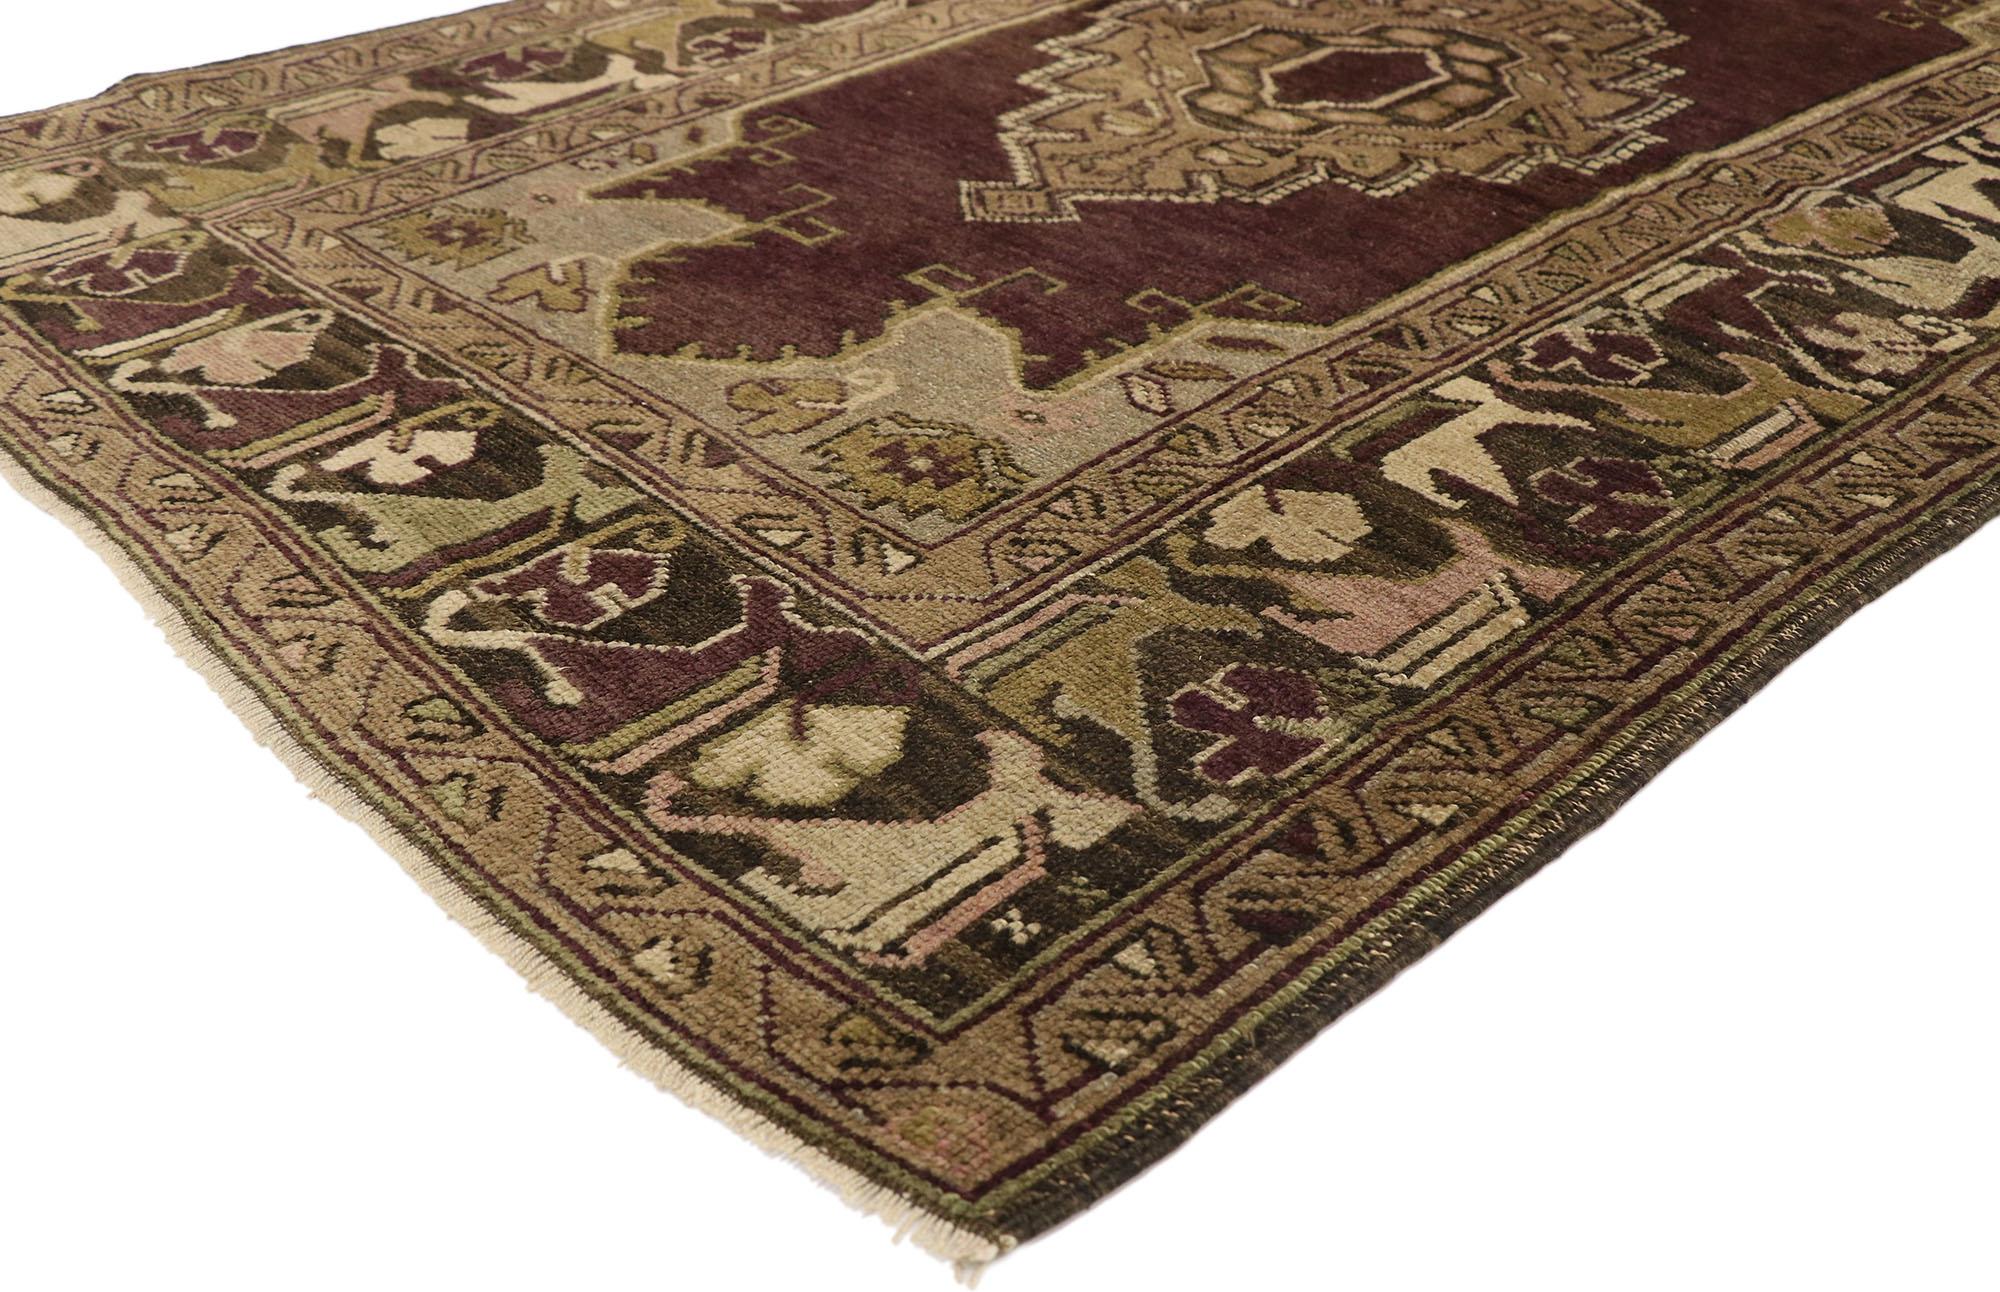 50112, vintage Turkish Oushak rug with Venetian Renaissance style. Warm and inviting, this hand knotted vintage Turkish Oushak rug features a stepped central medallion in an open abrashed eggplant colored field. Angular florals and foliage adorn